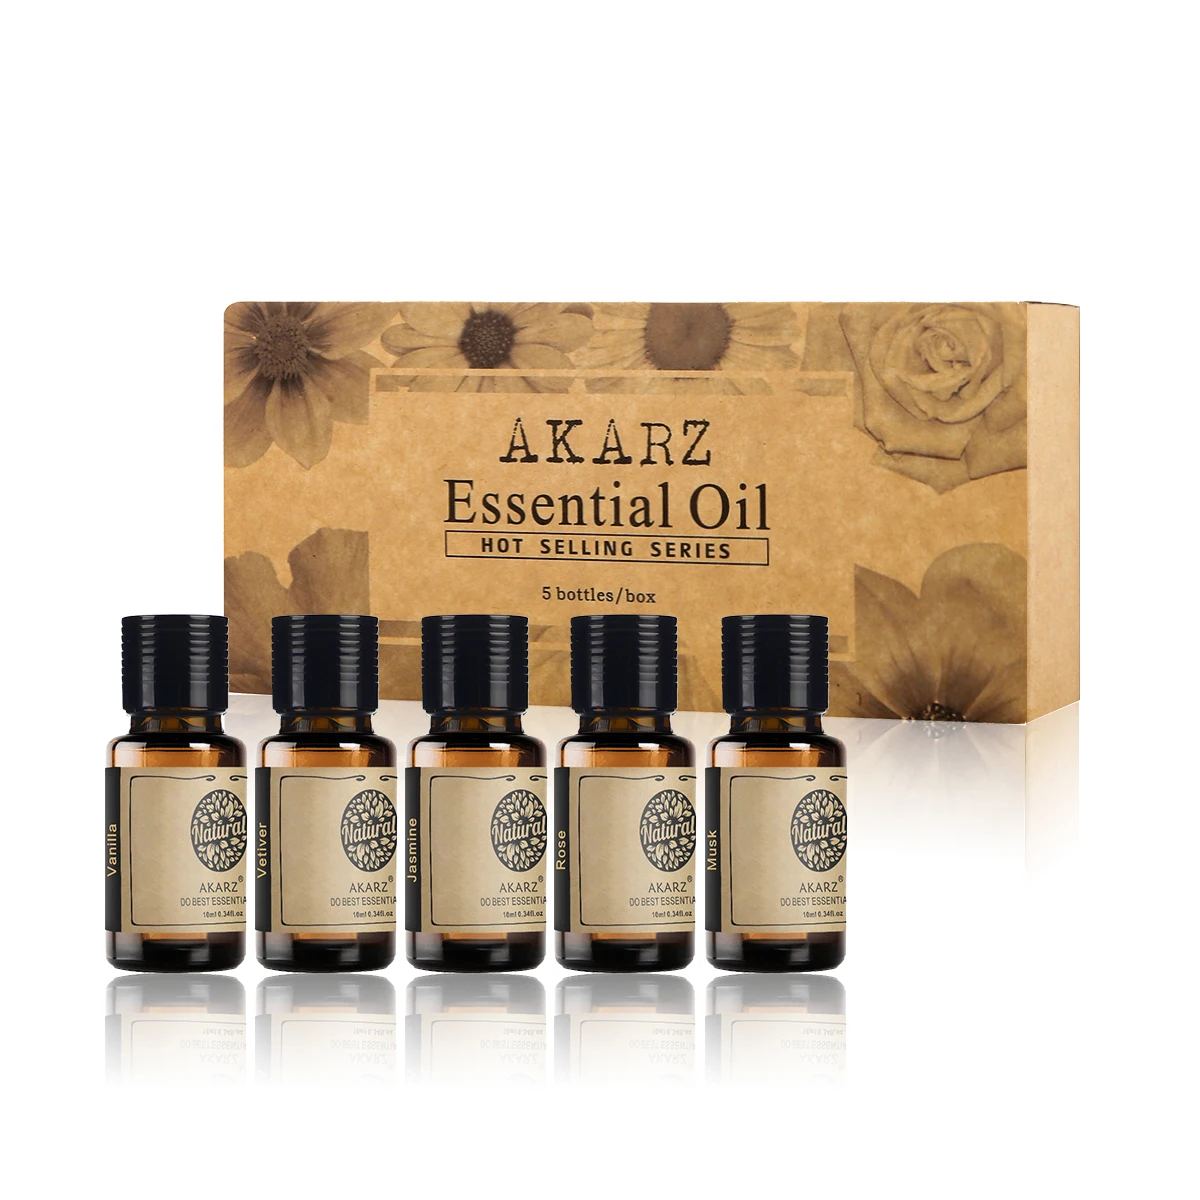 Akarz Hots Serie 5 Vanilla,vetiver,jasmine,rose ,musk Essential Oil For Diffuser, Face Body Care, Massage, Aromatherapy - Essential Oil - AliExpress